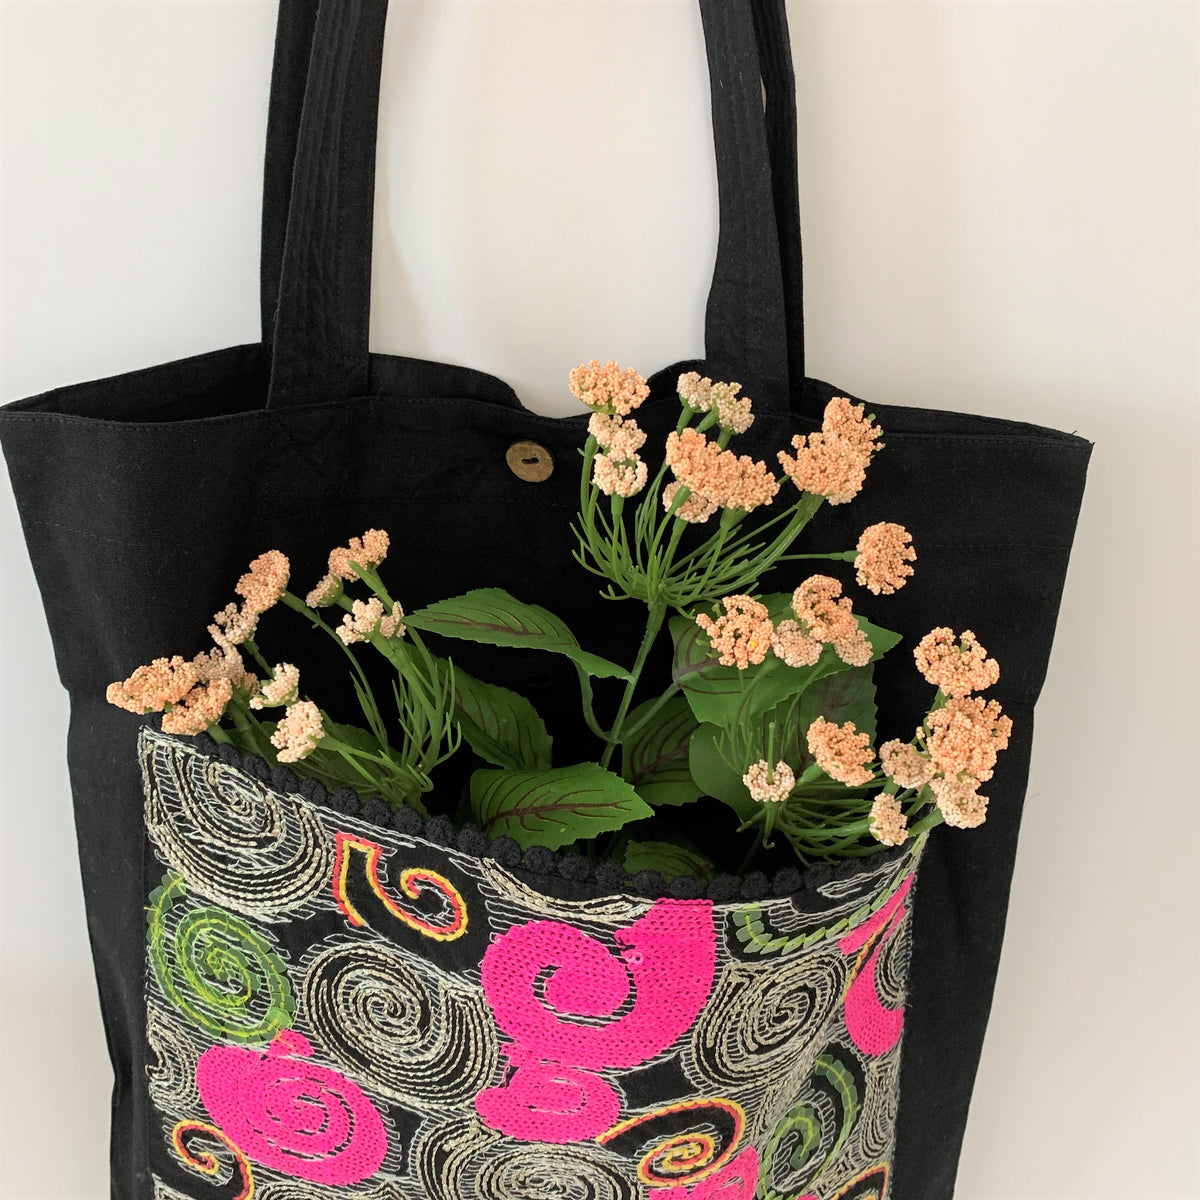 Buy Black Tote Bag With Hand Embroidered Flowers, Black Tote Bag